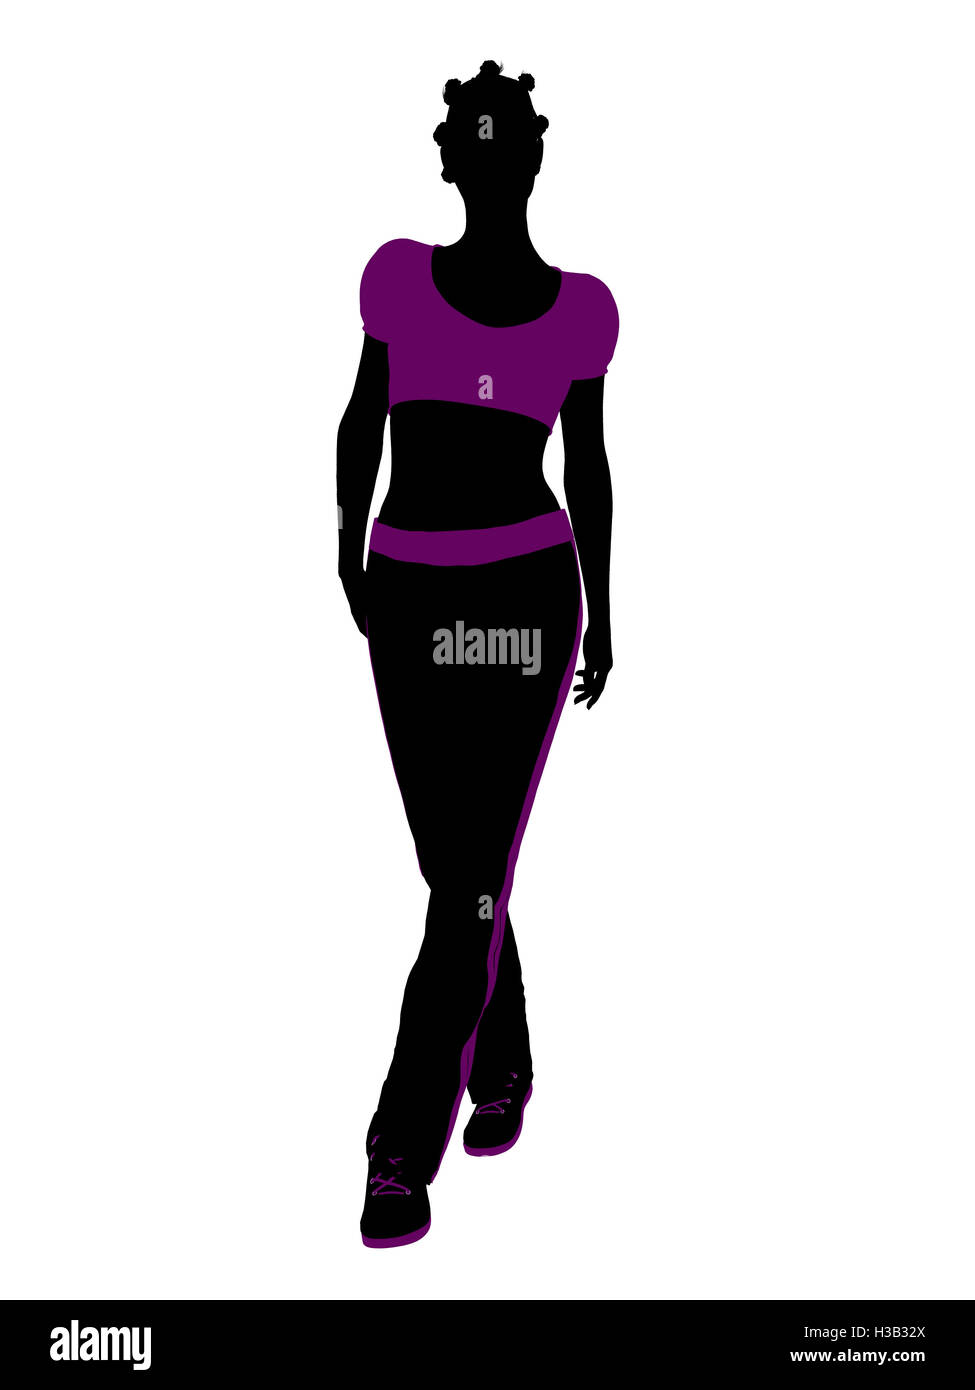 African American Female Workout Silhouette Stock Photo